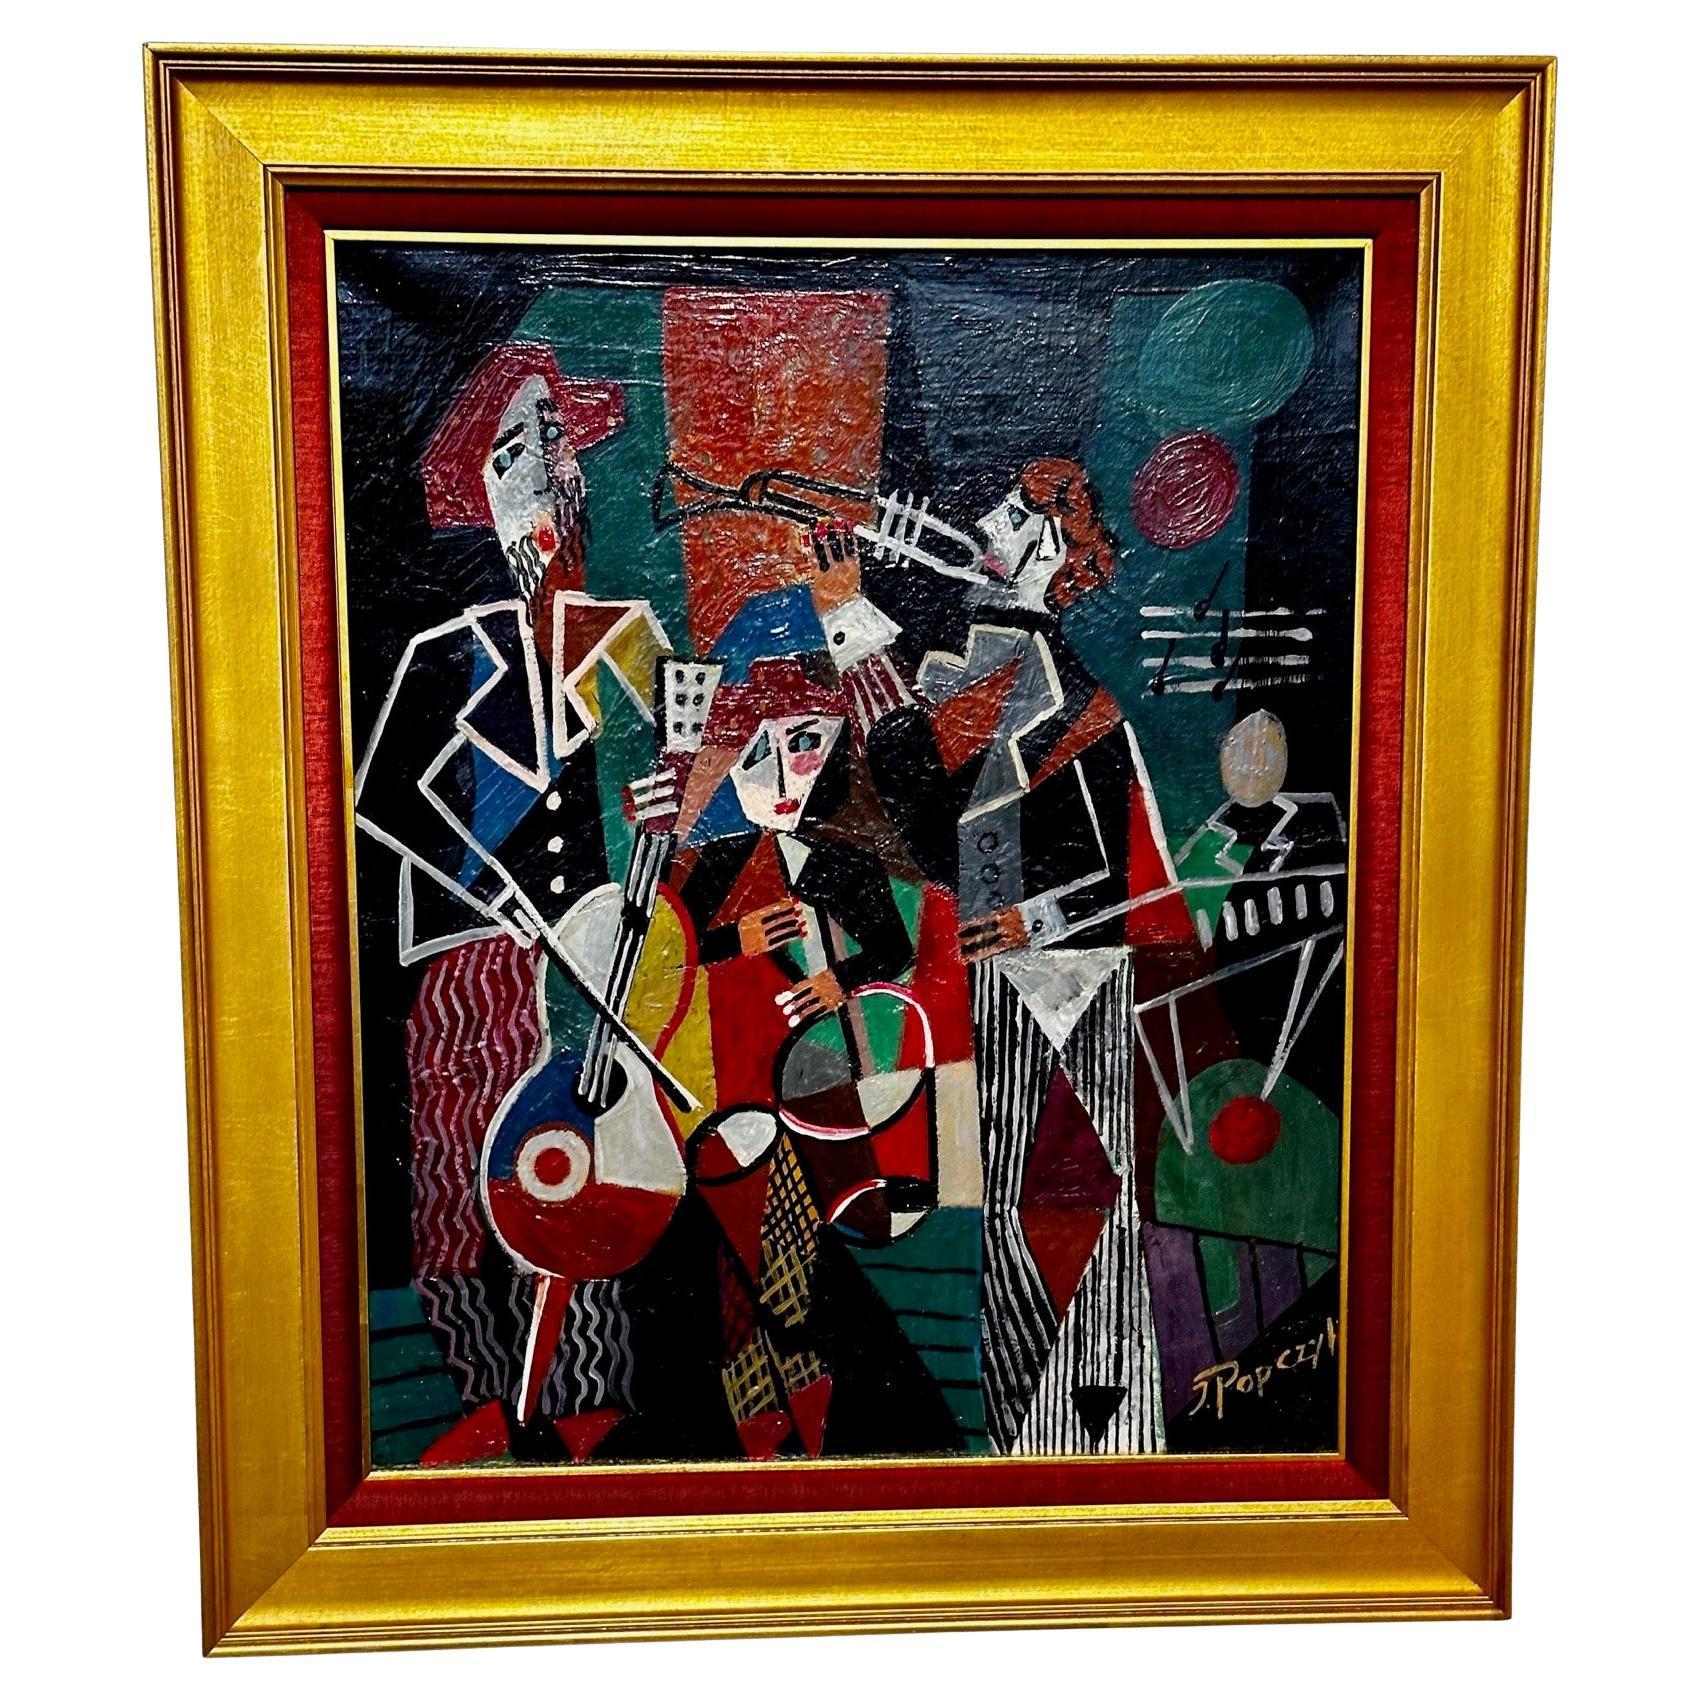 Jozef Popczyk Cubist Art Deco Painting Music Group oil on canvas.  Joseph Popczyk Polish artist known for his vivid palette and love of Cubism, and in this case, the chevrons and wavy patterns of Art Deco can also be detected. Like many of his